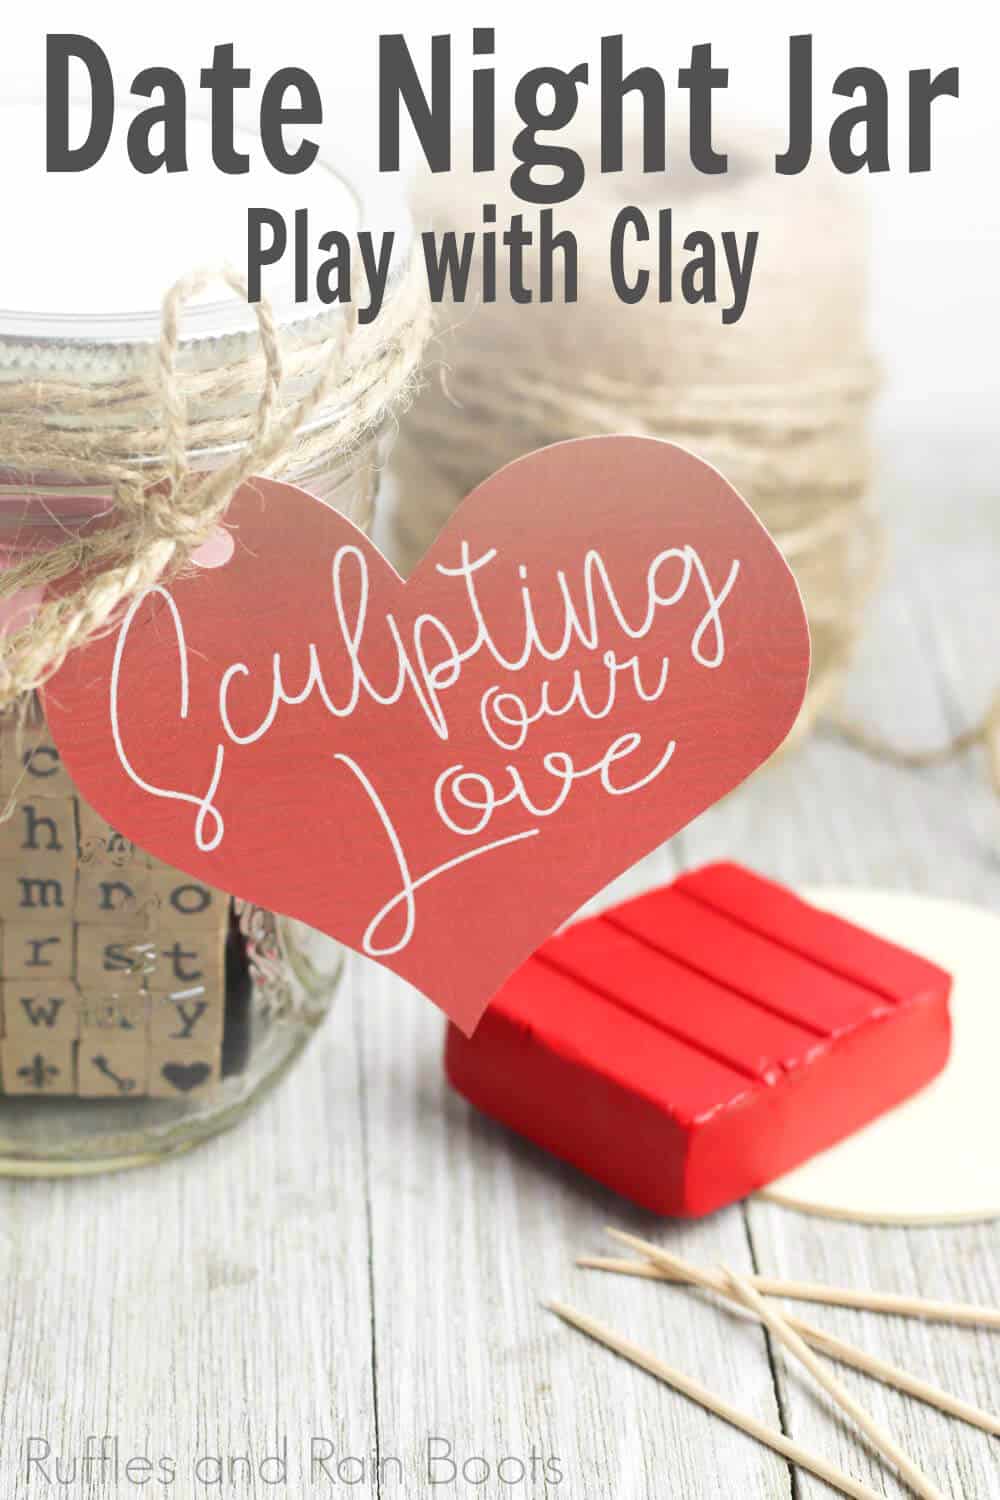 date night ideas clay and sculpting sculpting date night in a jar with red clay and twine on a wooden table with a white background with text which reads date night jar play with clay